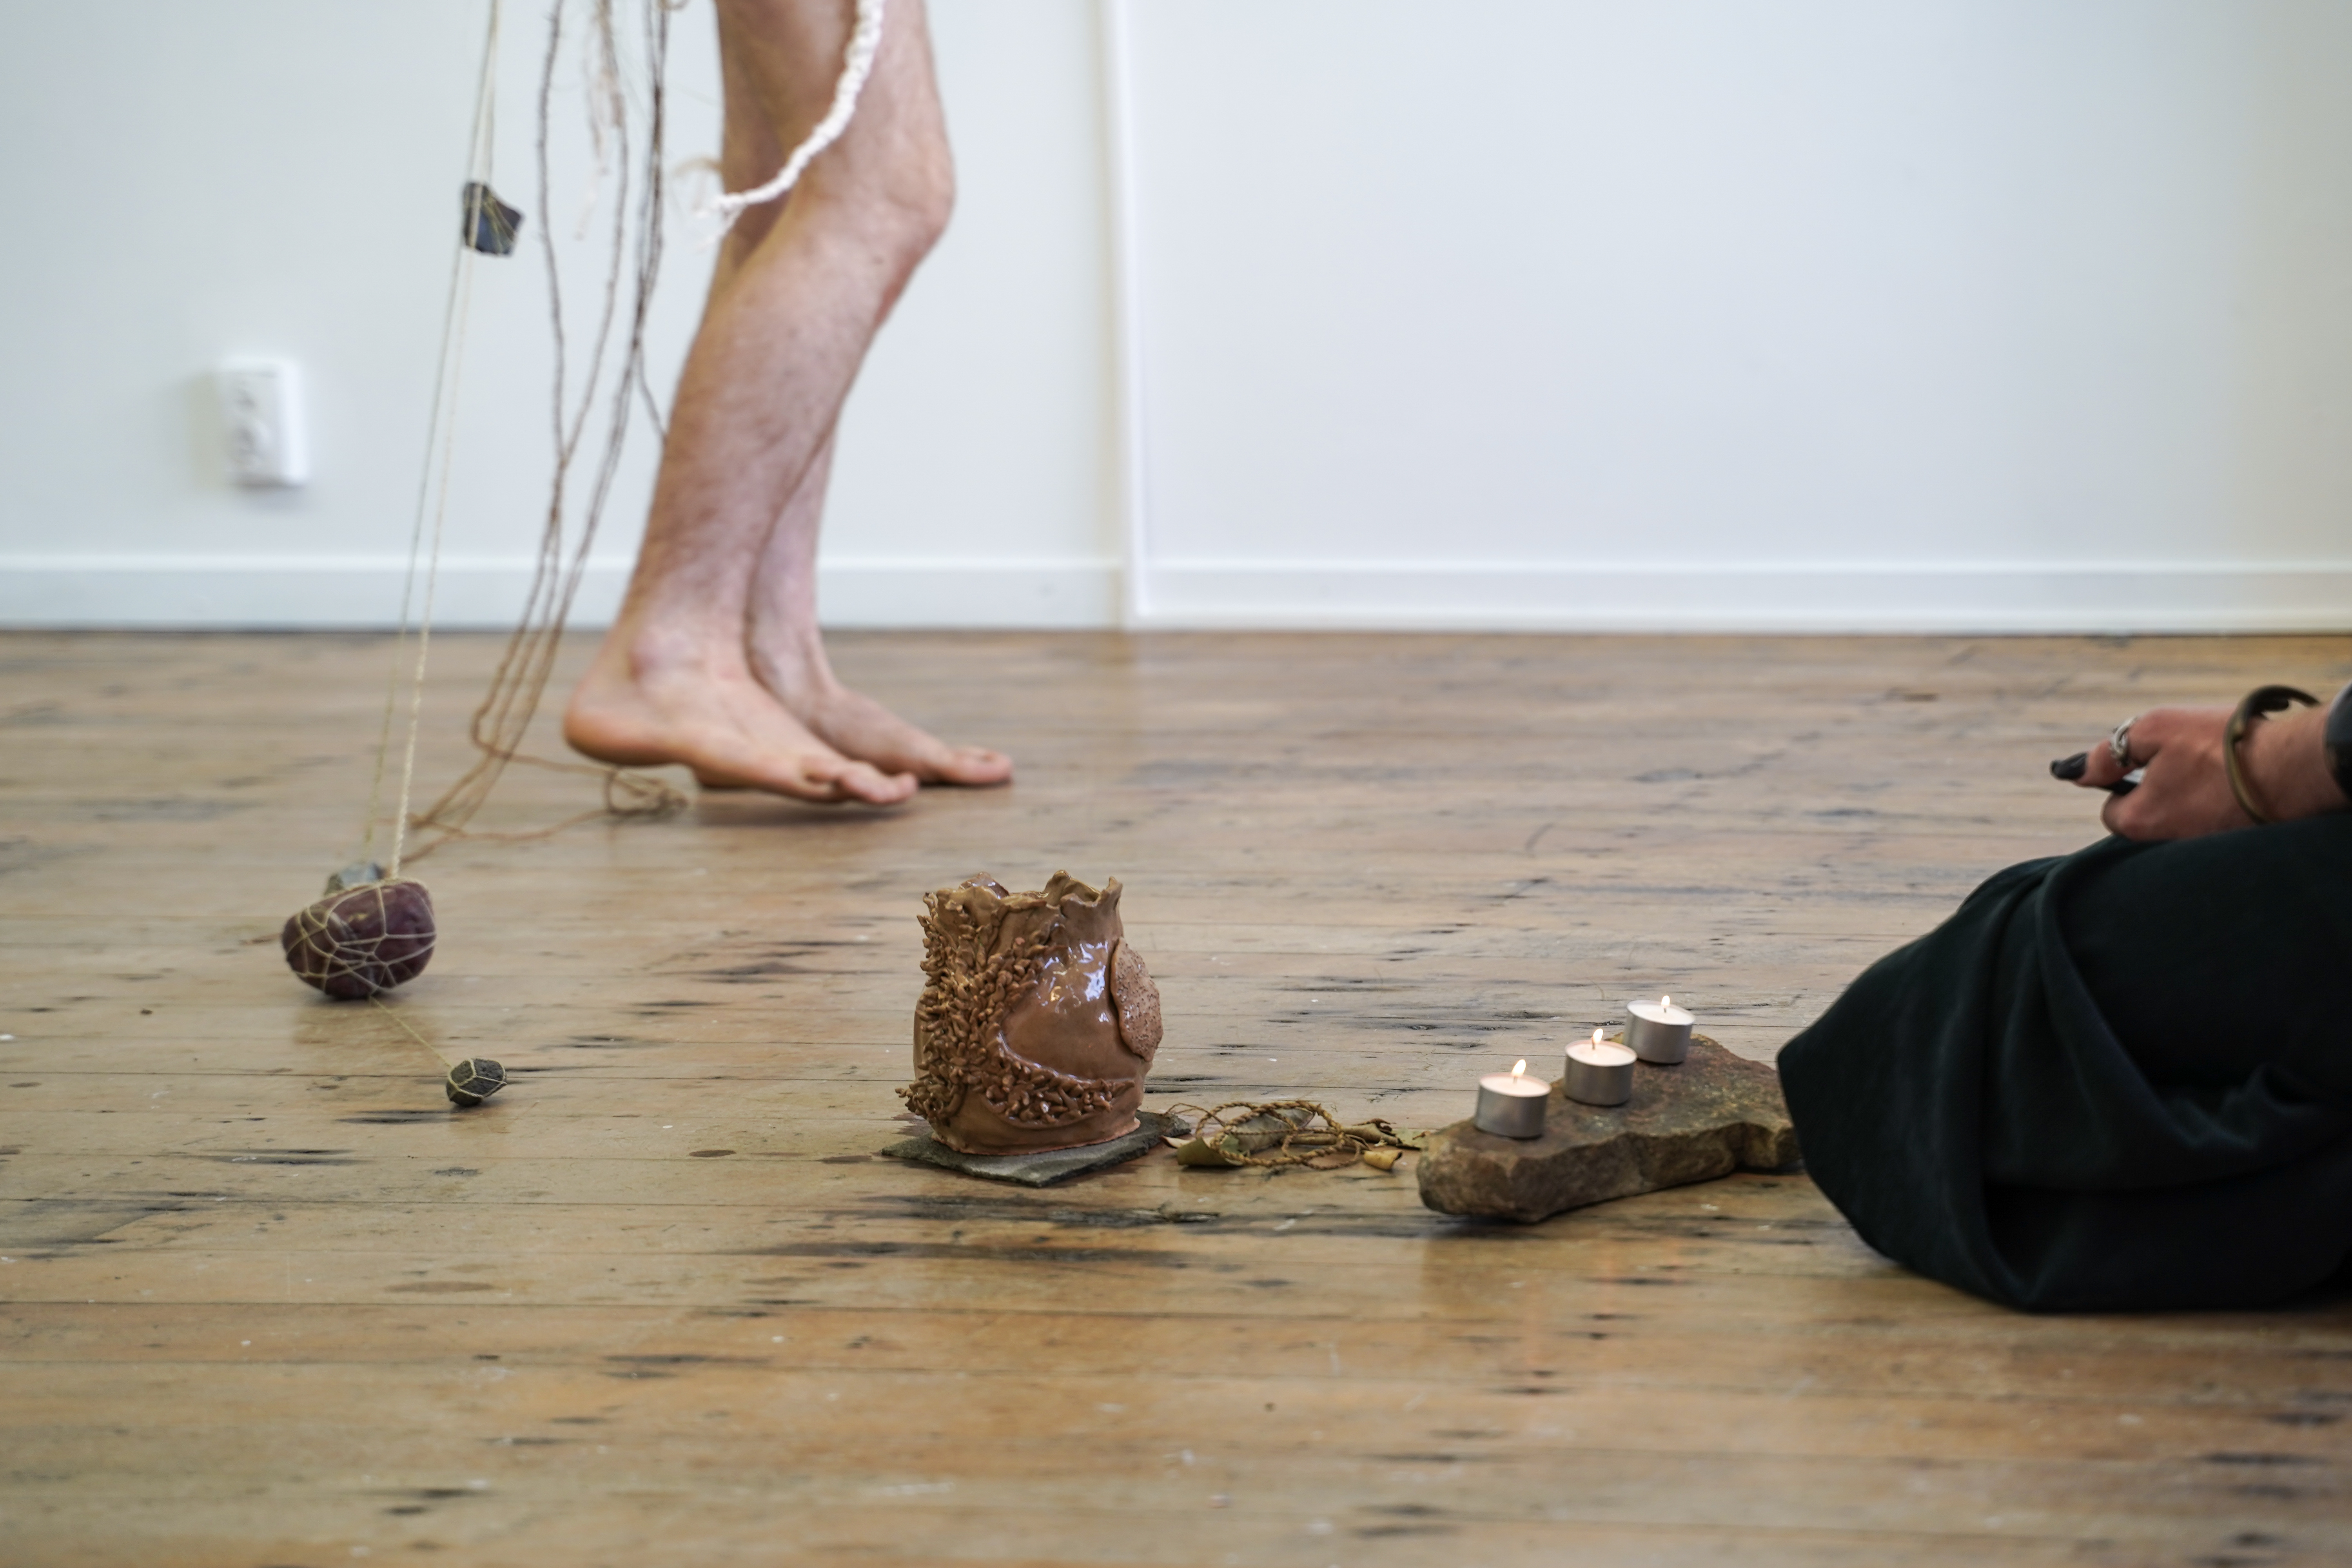 <p>Connor Fitzgerald and Louie Zalk-Neale, <em>GLOSSY LEAF Kiss, I dug a hole and they sprinkled sand in it</em>, 2021 (performance detail), Blue Oyster Art Project Space, Dunedin. Image courtesy of the artist and Blue Oyster Art Project Space. Photograph: Bunty Bou</p>
